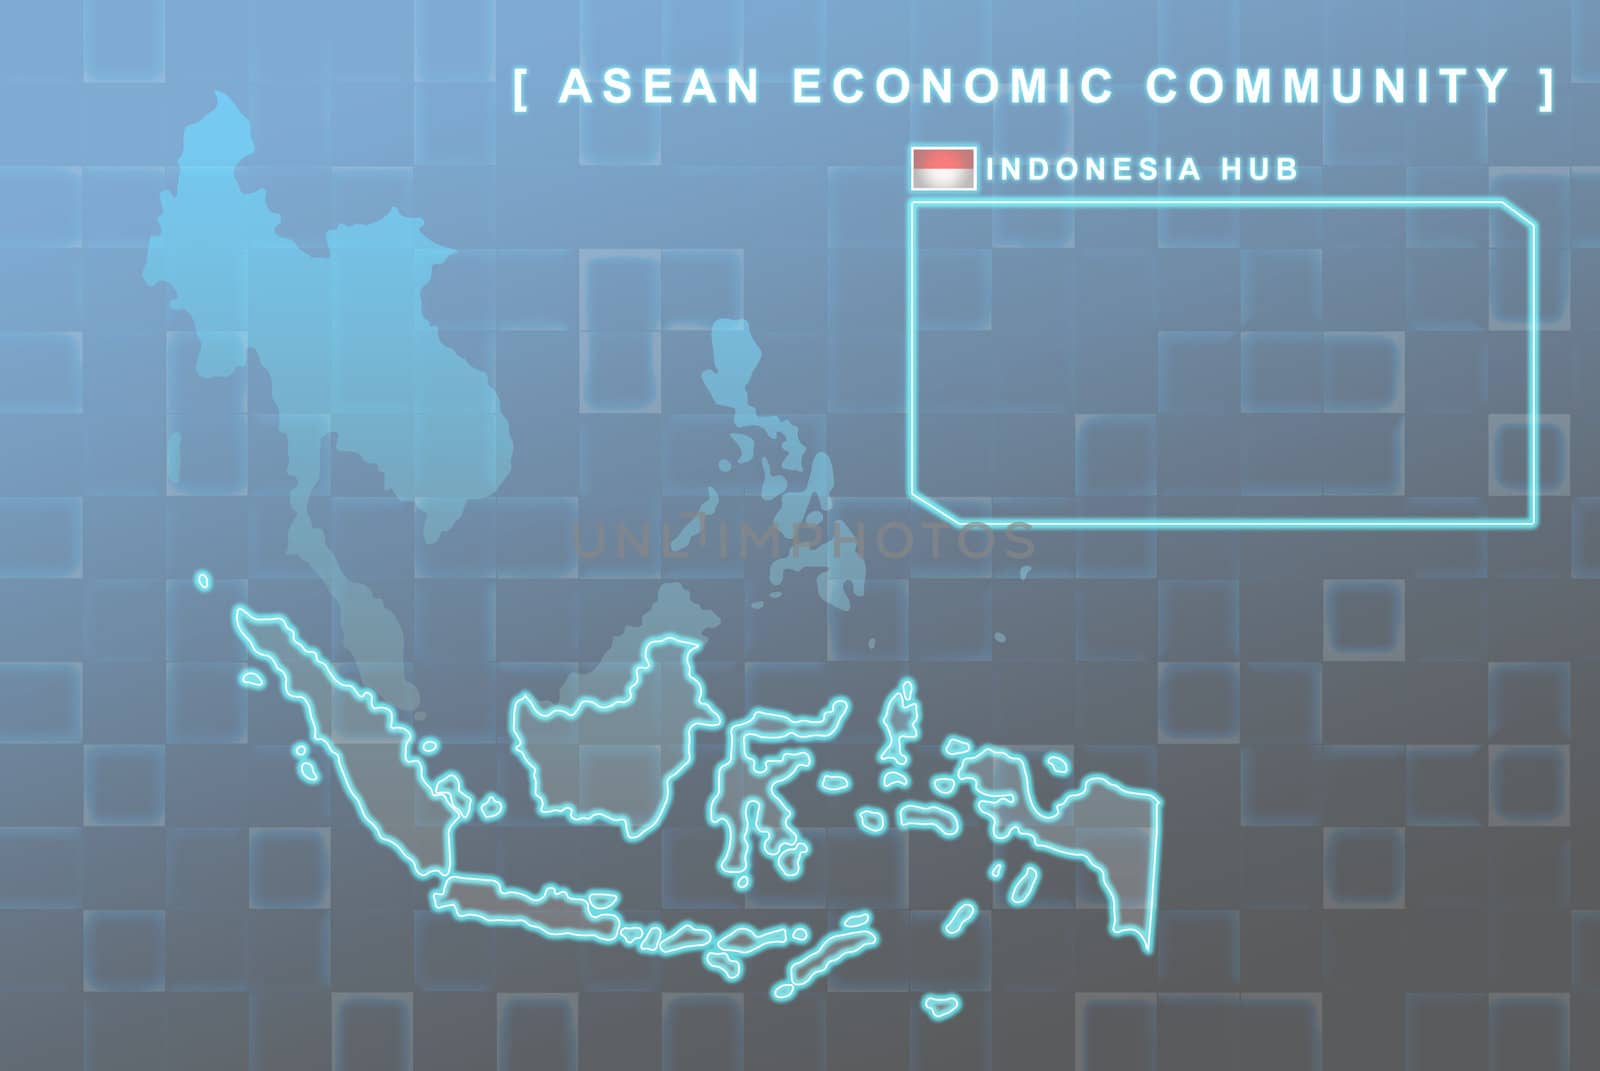 Modern map of South East Asia countries that will be member of AEC with Indonesia flag symbol in background